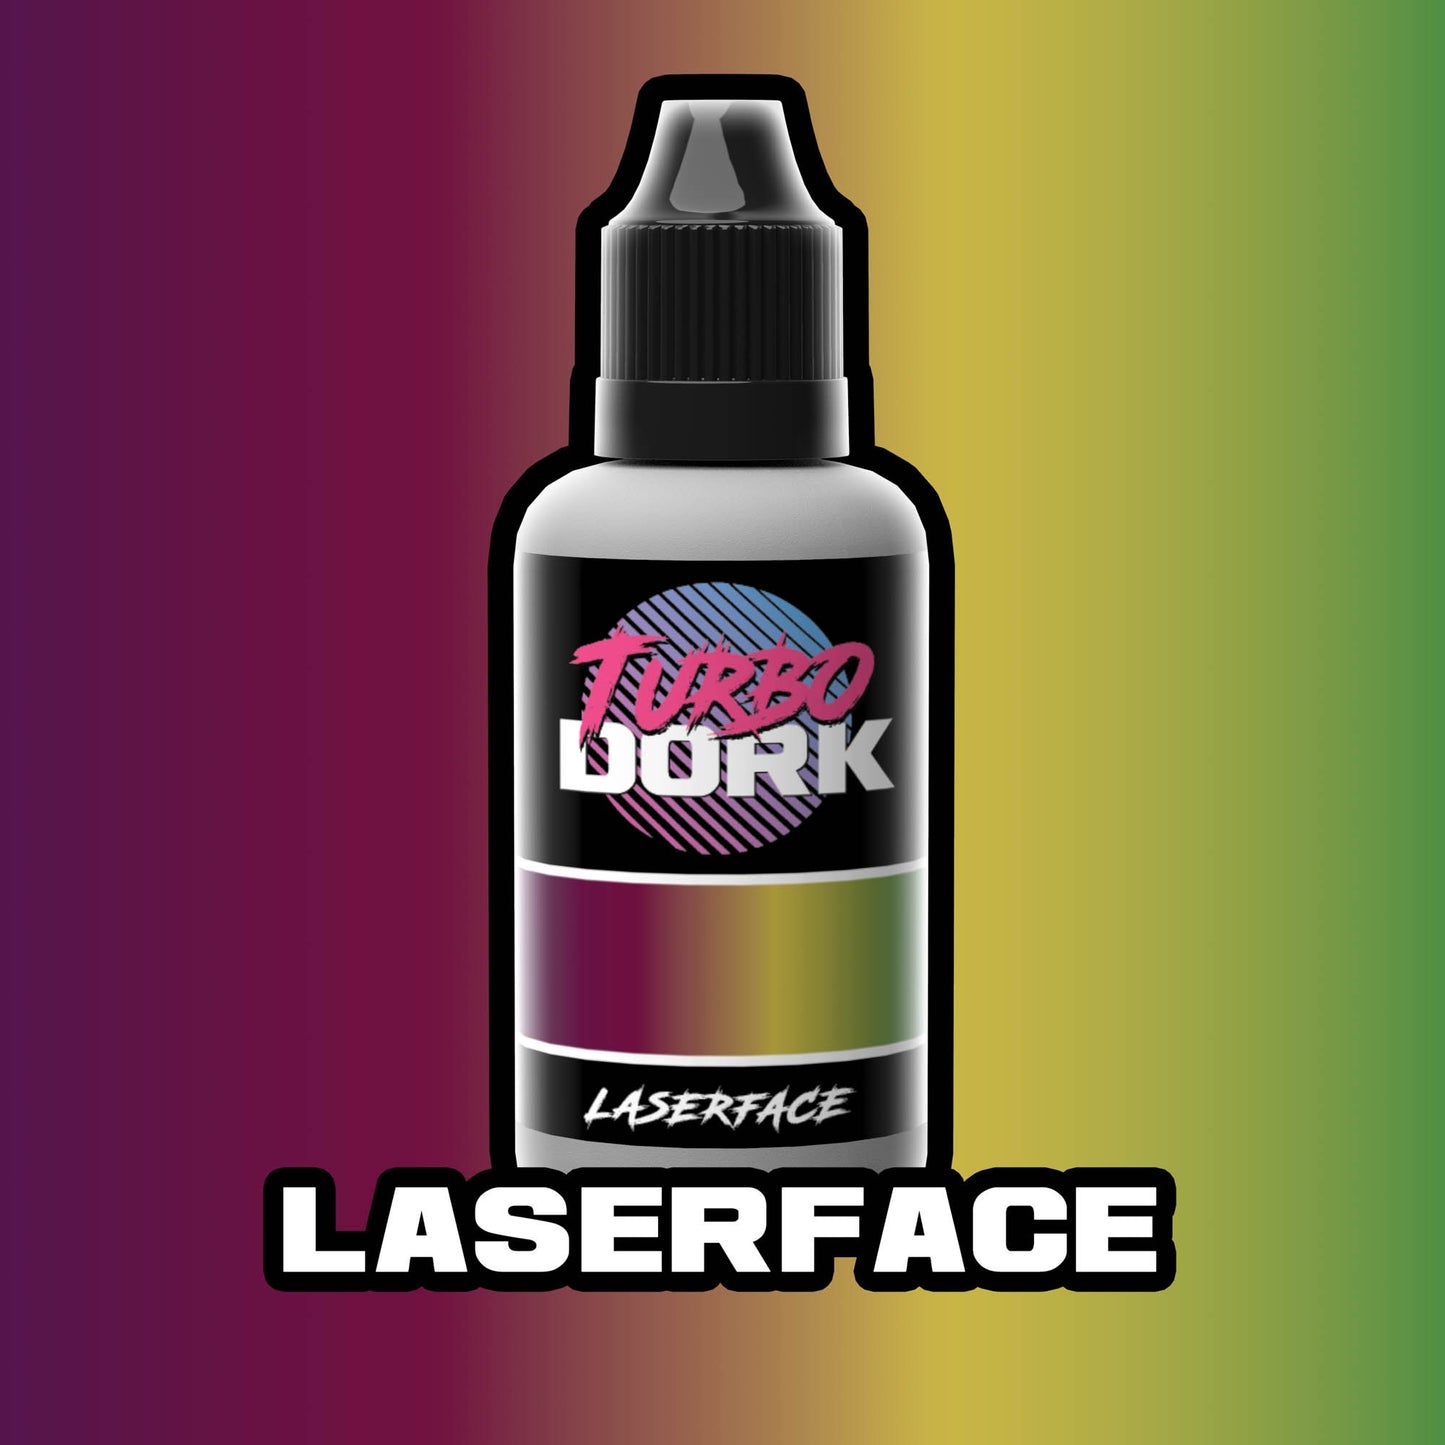 bottle of red, green, and yellow turboshift paint (Laserface)